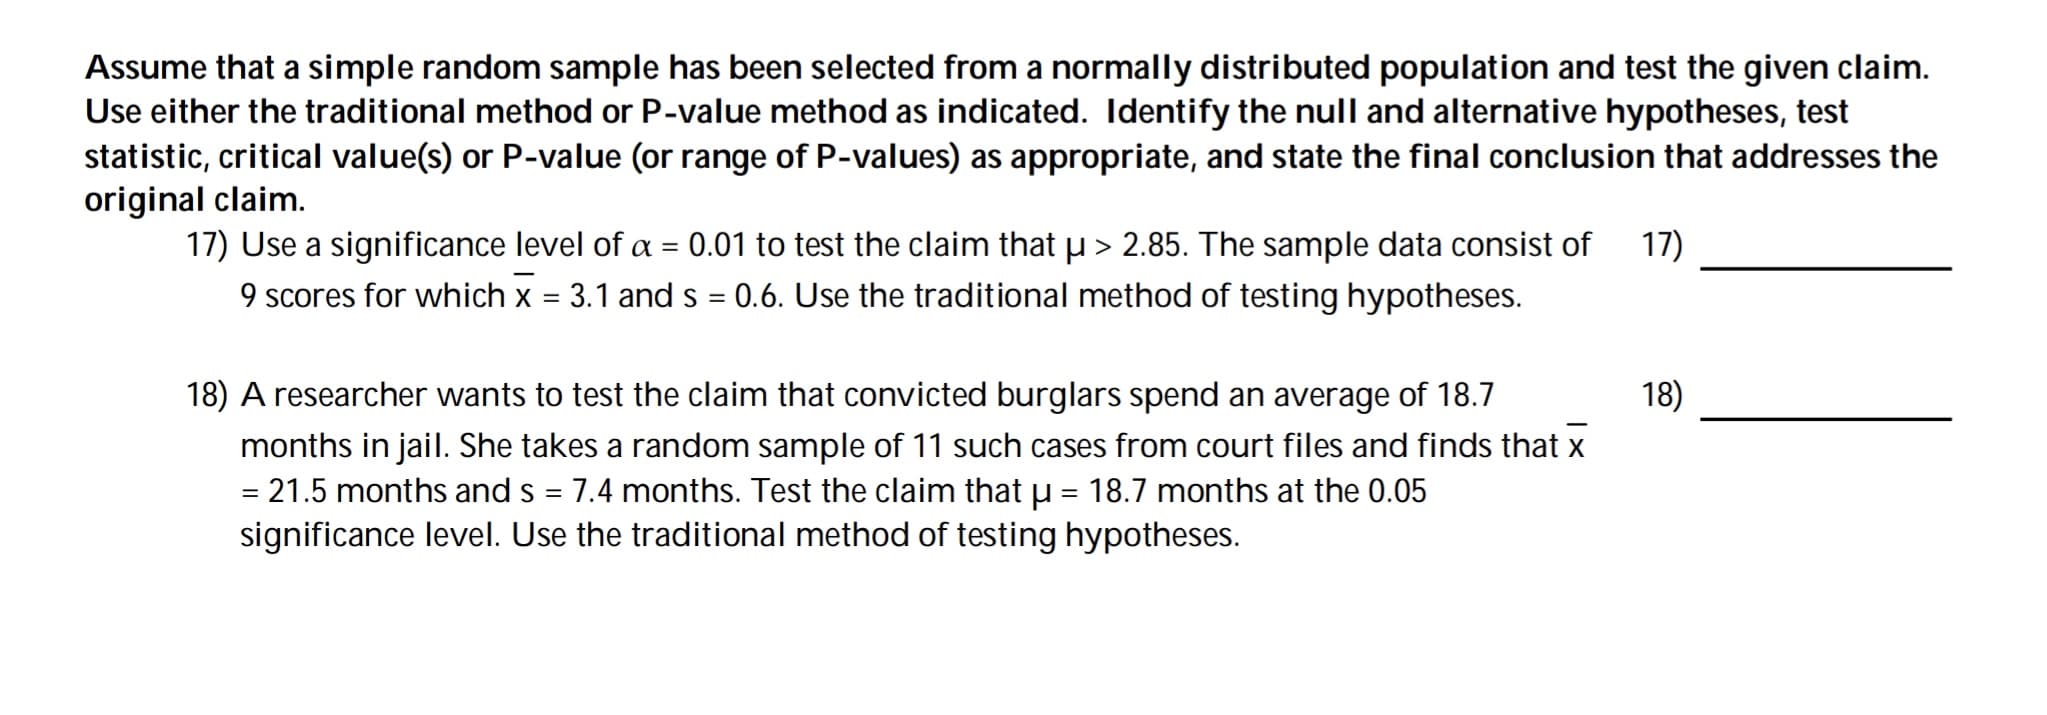 Use a significance level of a =
9 scores for which x = 3.1 and s = 0.6. Use the traditional method of testing hypotheses.
0.01 to test the claim that u > 2.85. The sample data consist of
